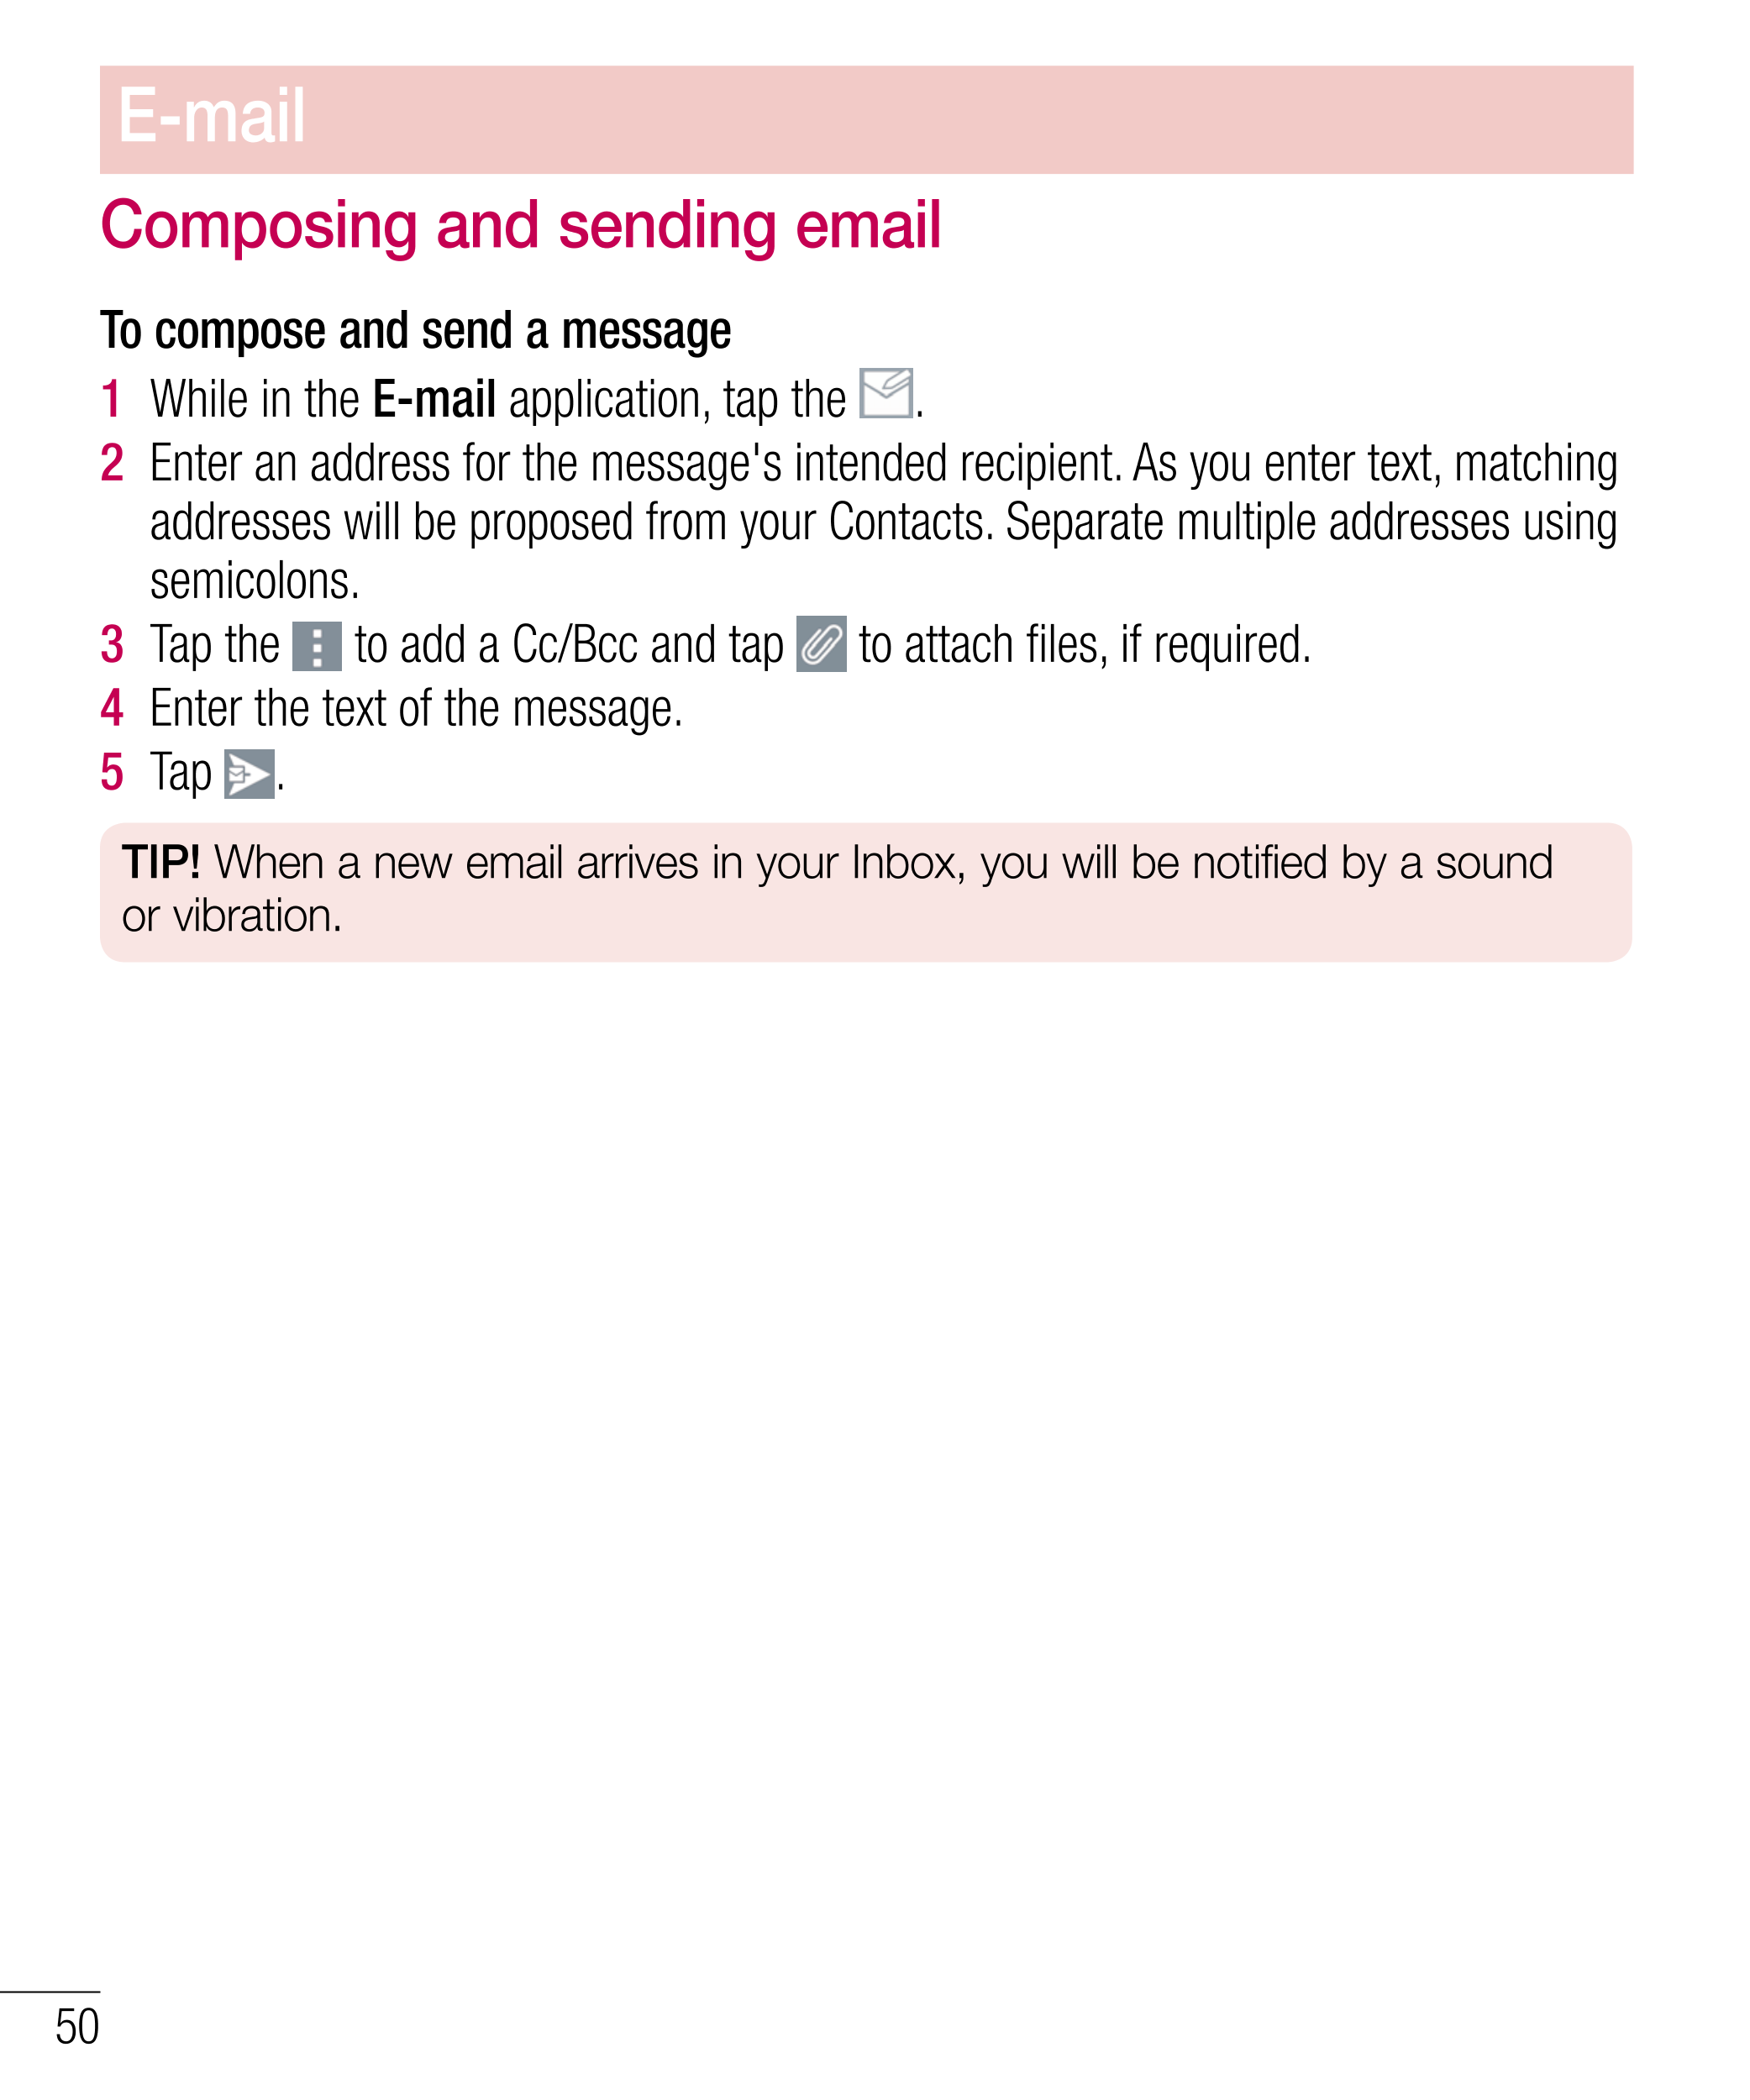 E-mail
Composing and sending email
To compose and send a message
1   While in the  E-mail application, tap the  .
2   Enter an a